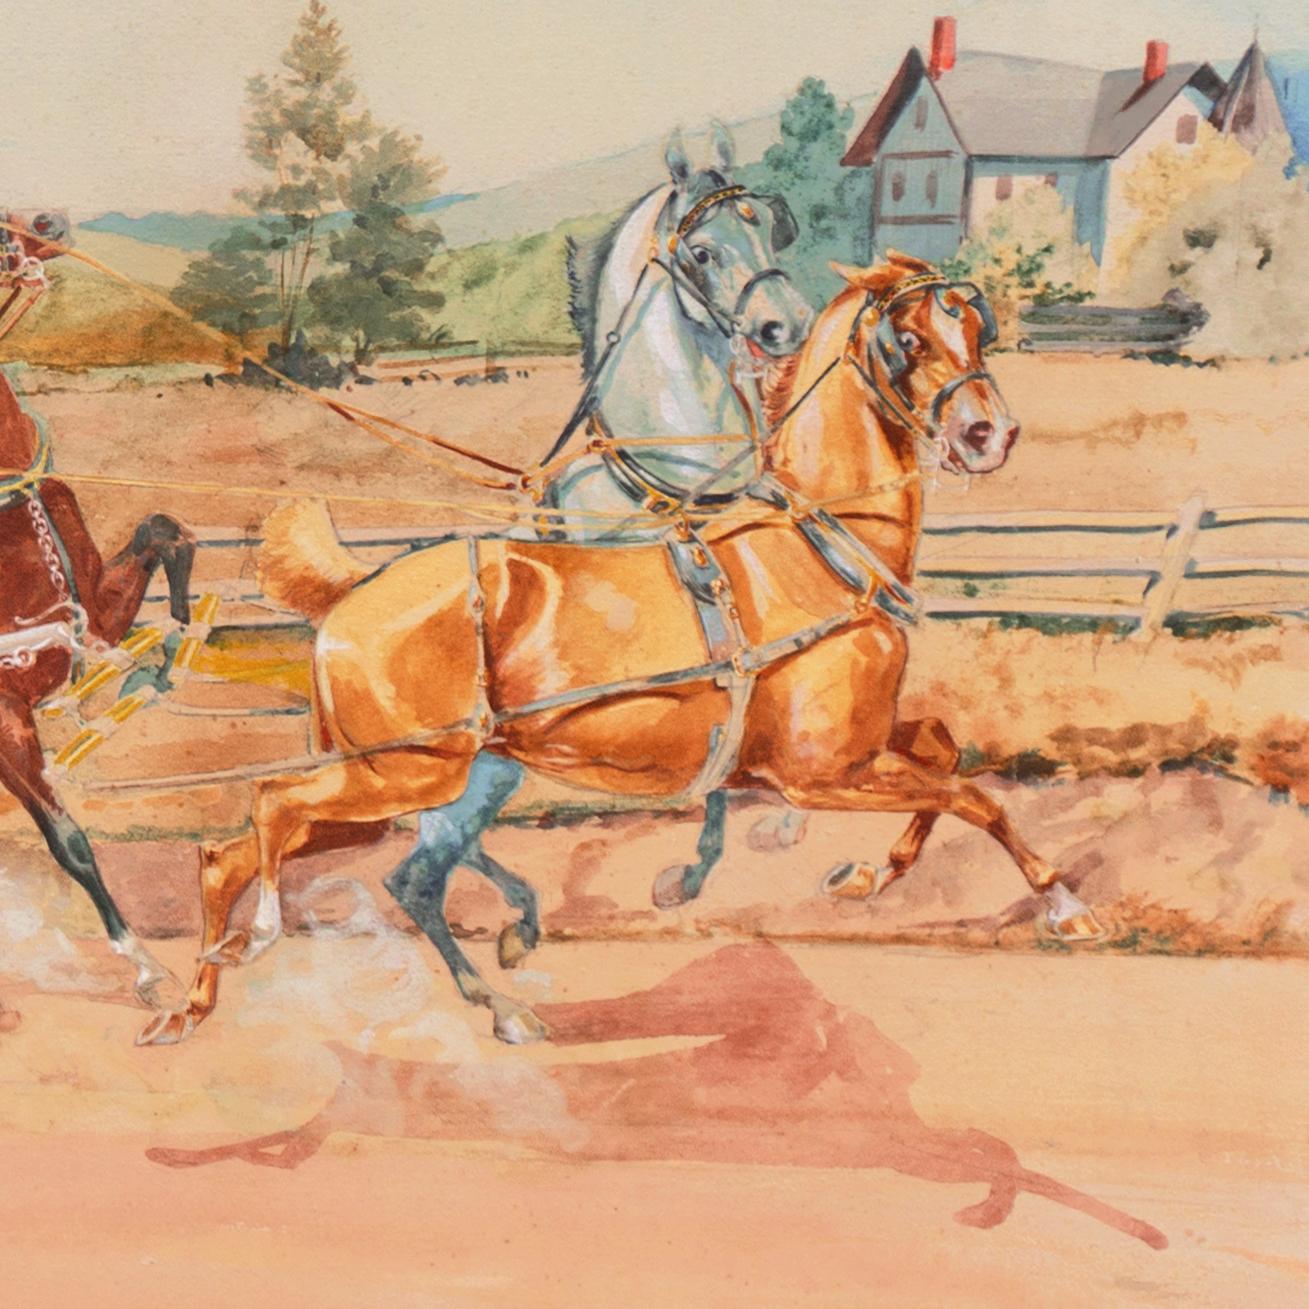 'London to Brighton Coach', Massachusetts, National Academy of Design, Horses For Sale 1